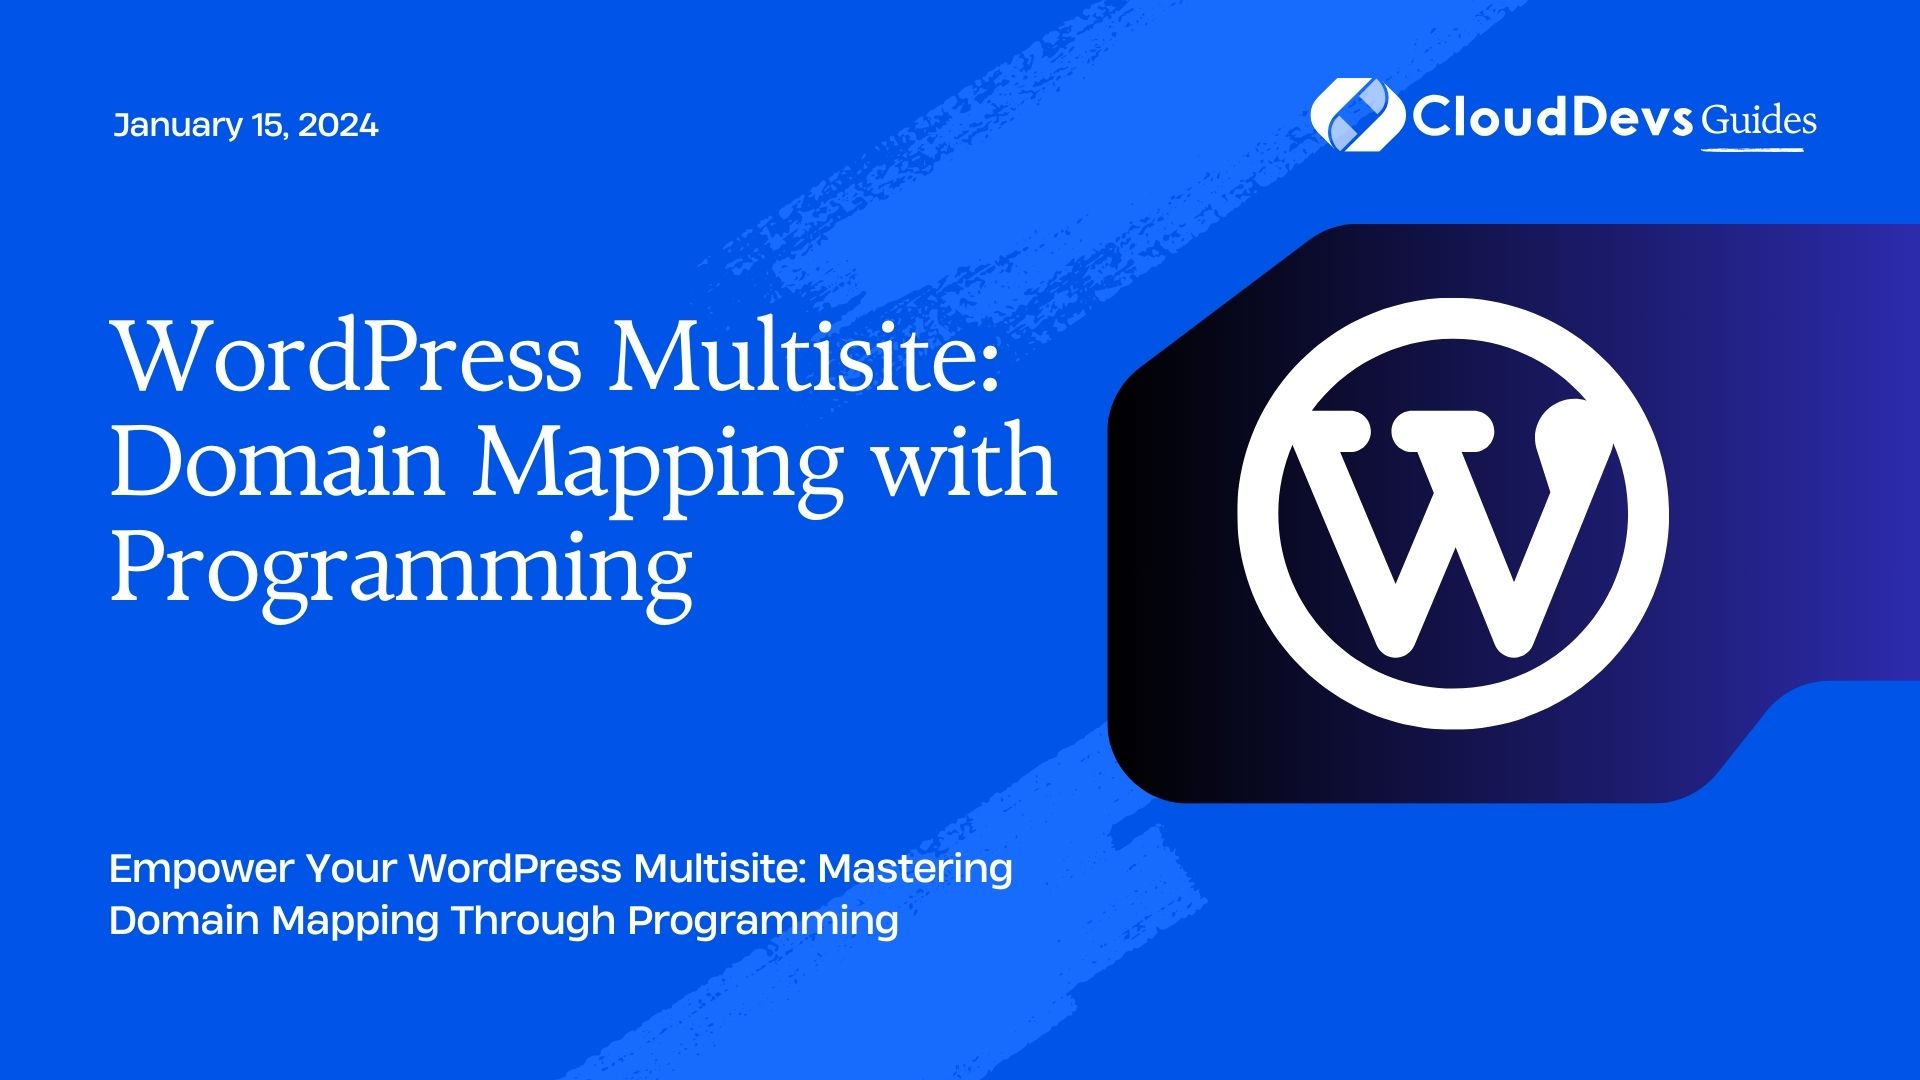 WordPress Multisite: Domain Mapping with Programming